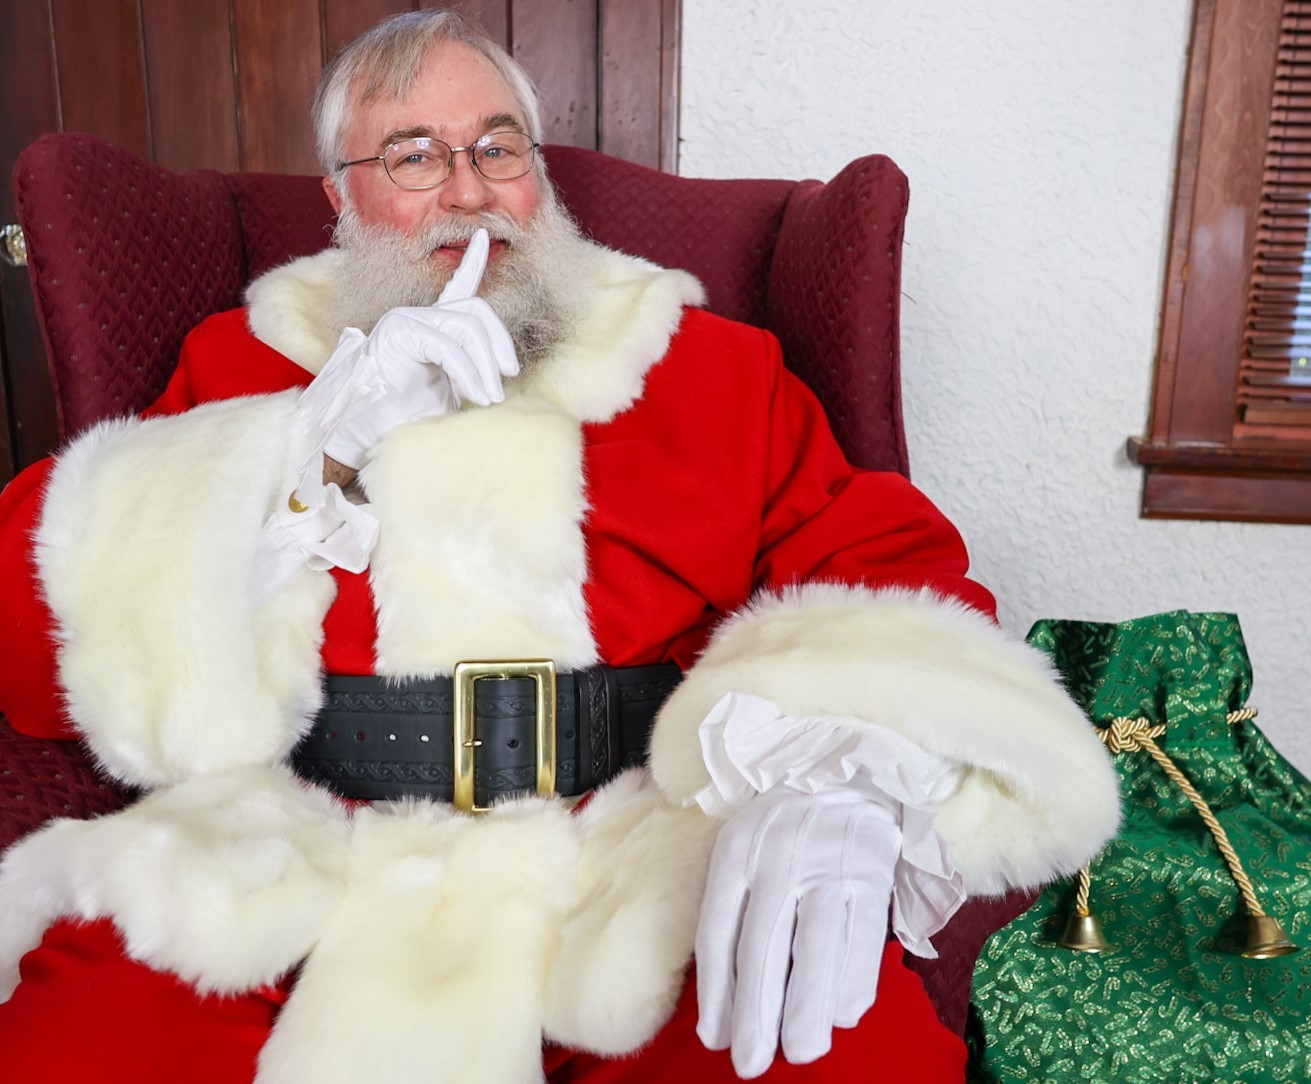 Tom Nichols, a retired media specialist for elementary schools, takes on a new gig as Kris Kringle